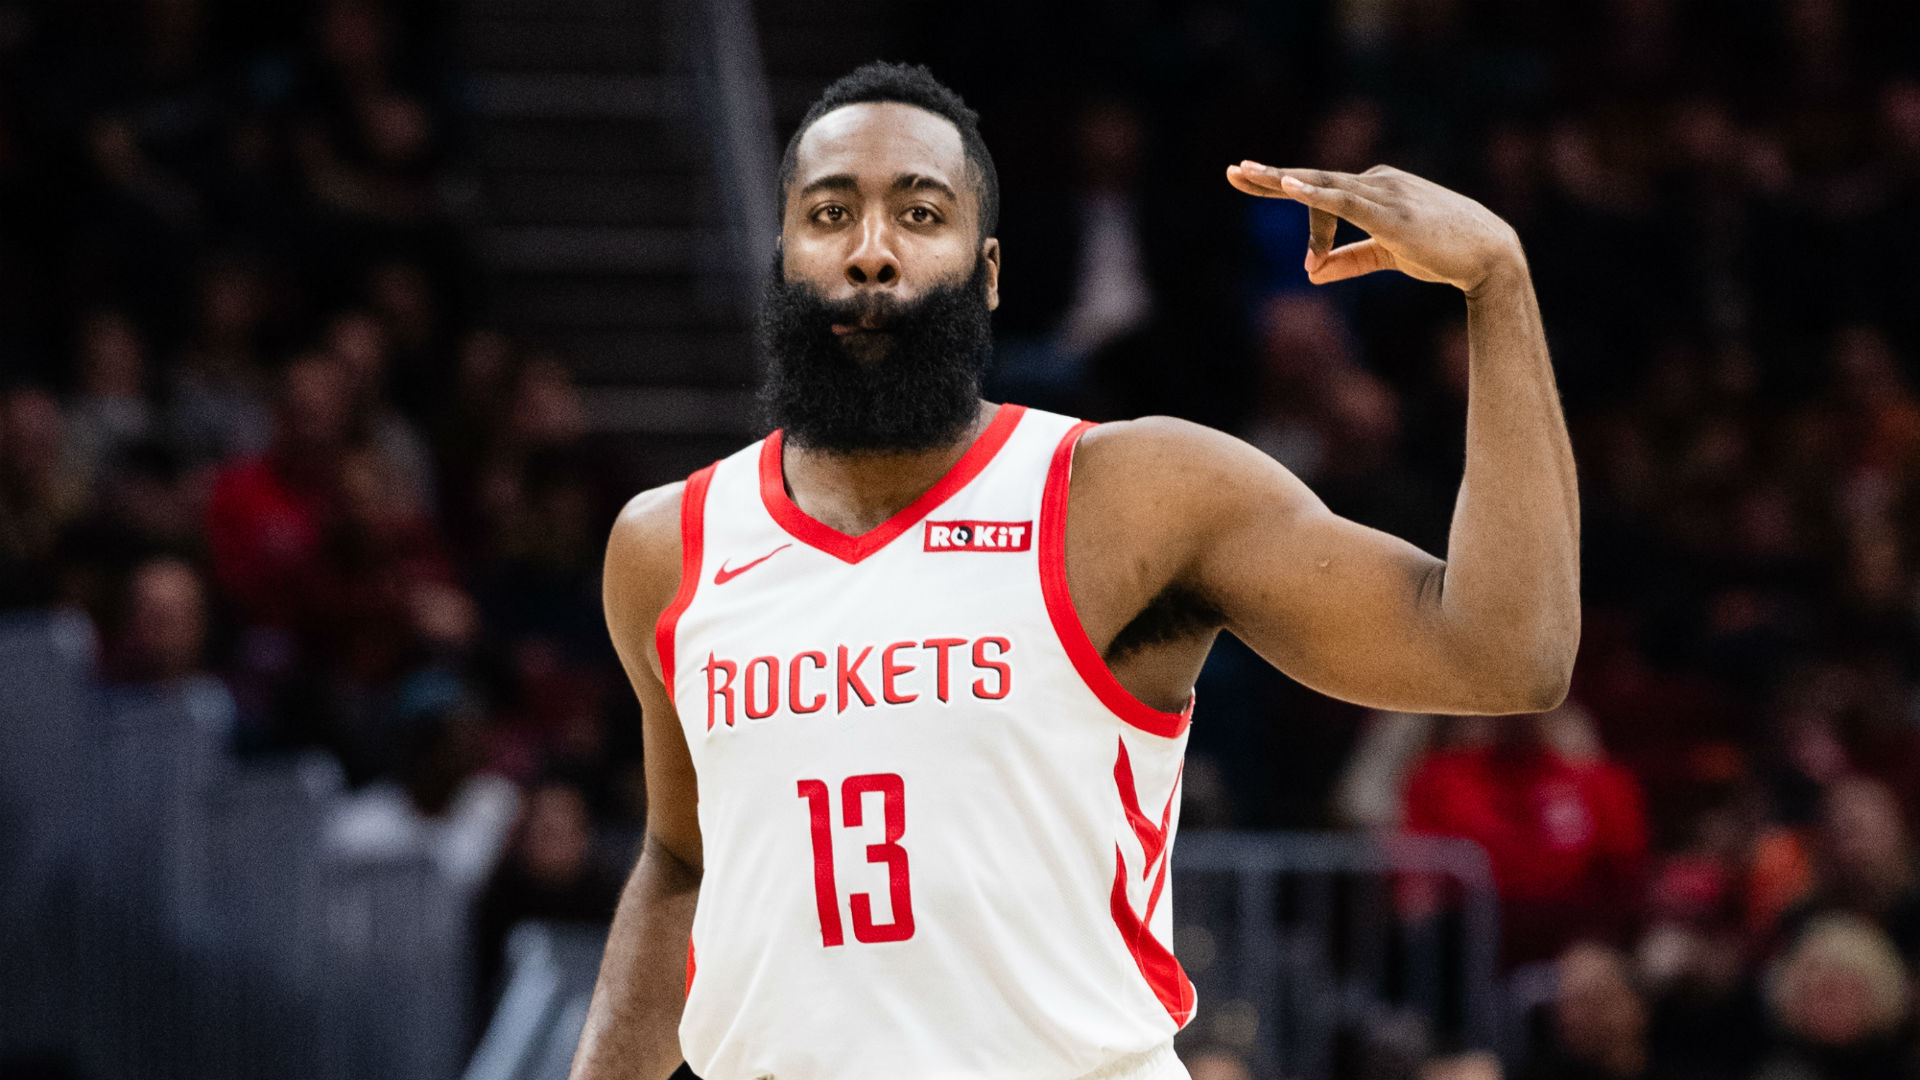 James Harden was named MVP last season and the Houston Rockets guard's numbers in 2018-19 are even more impressive.